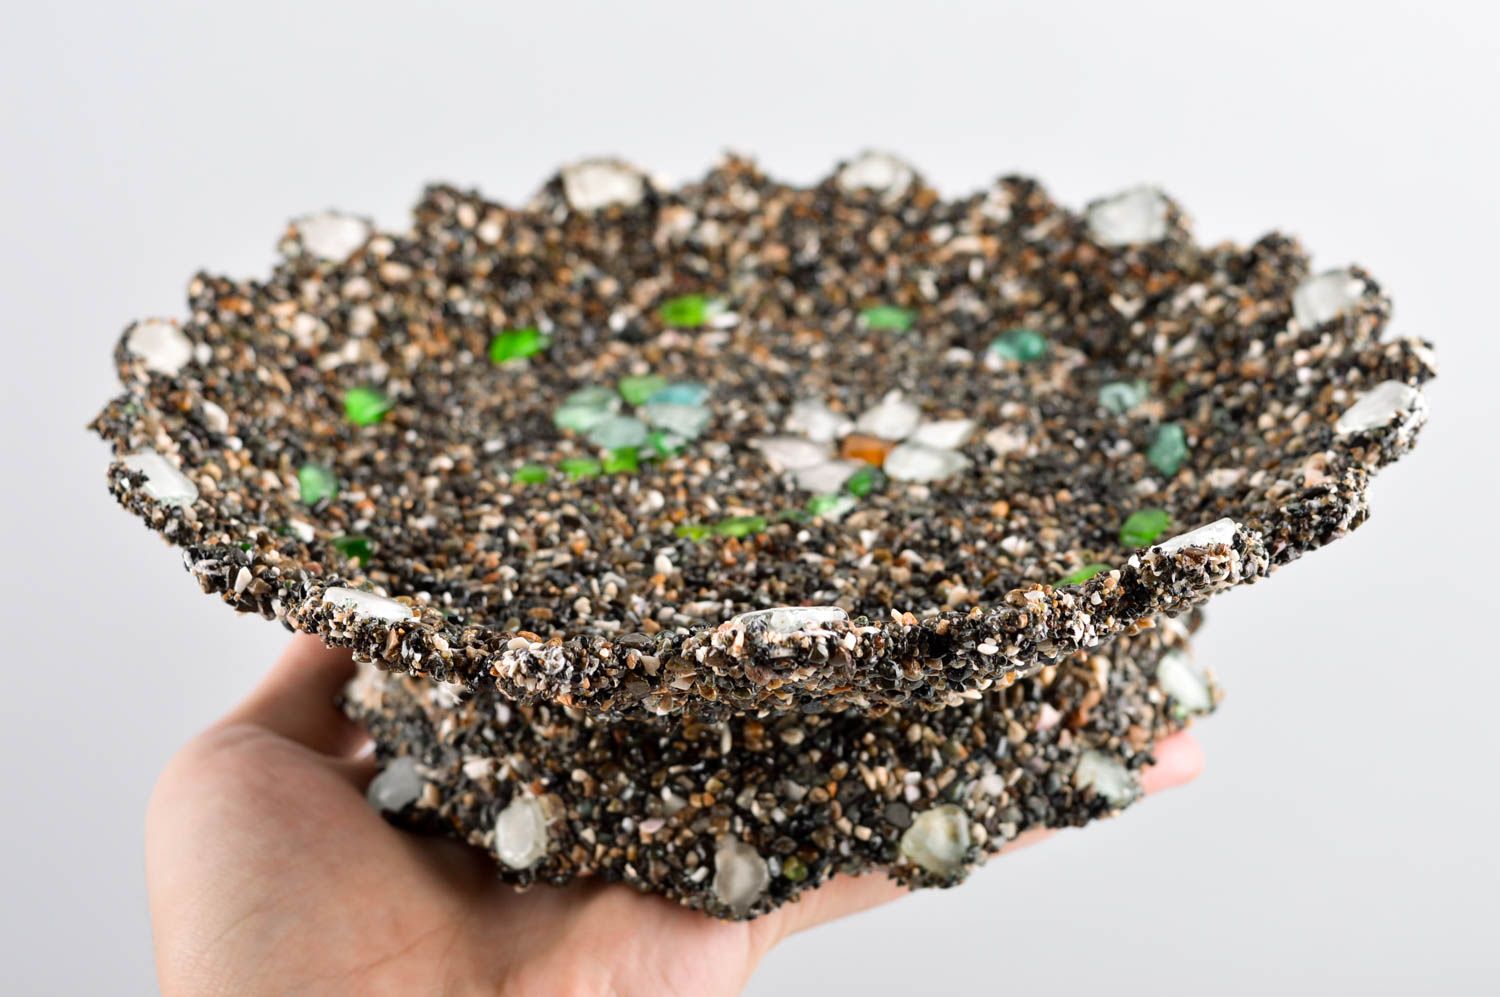 Round candy bowl 9 inches wide made of cardboard covered with sea pebbles 1,26 lb photo 5